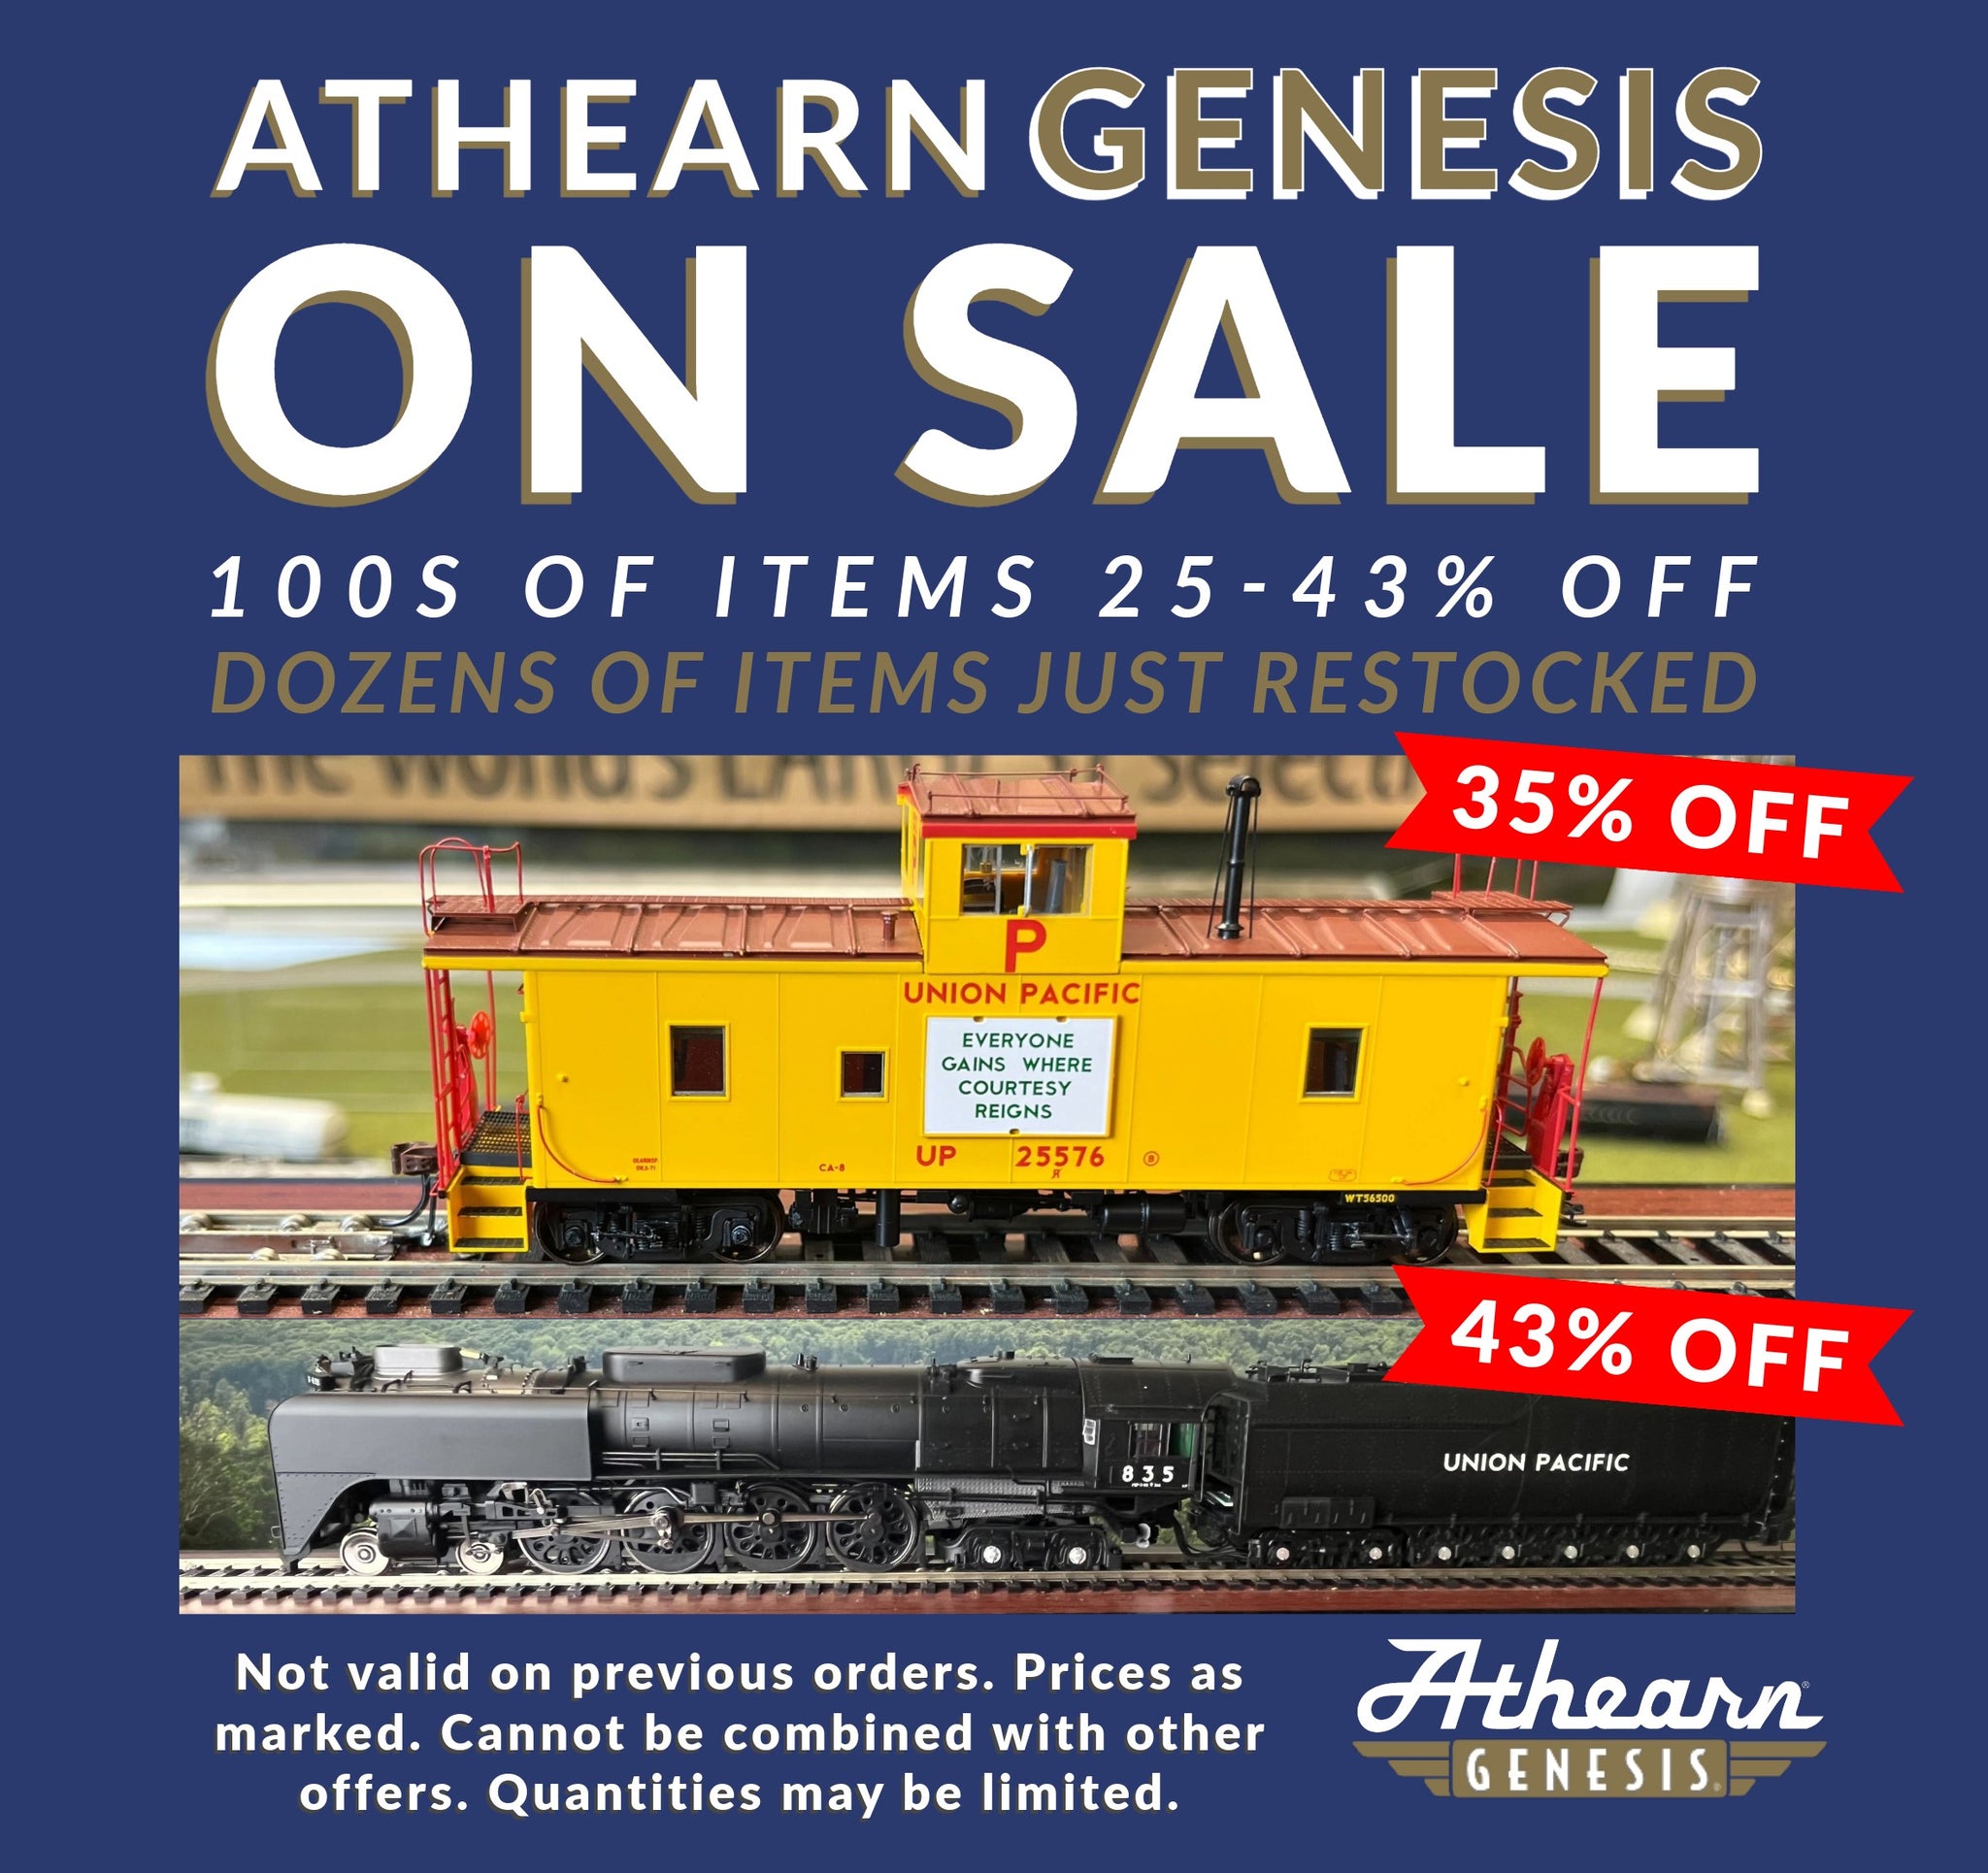 ATHEARN GENESIS ON SALE: 100S OF ITEMS DISCOUNTED; DOZENS RESTOCKED